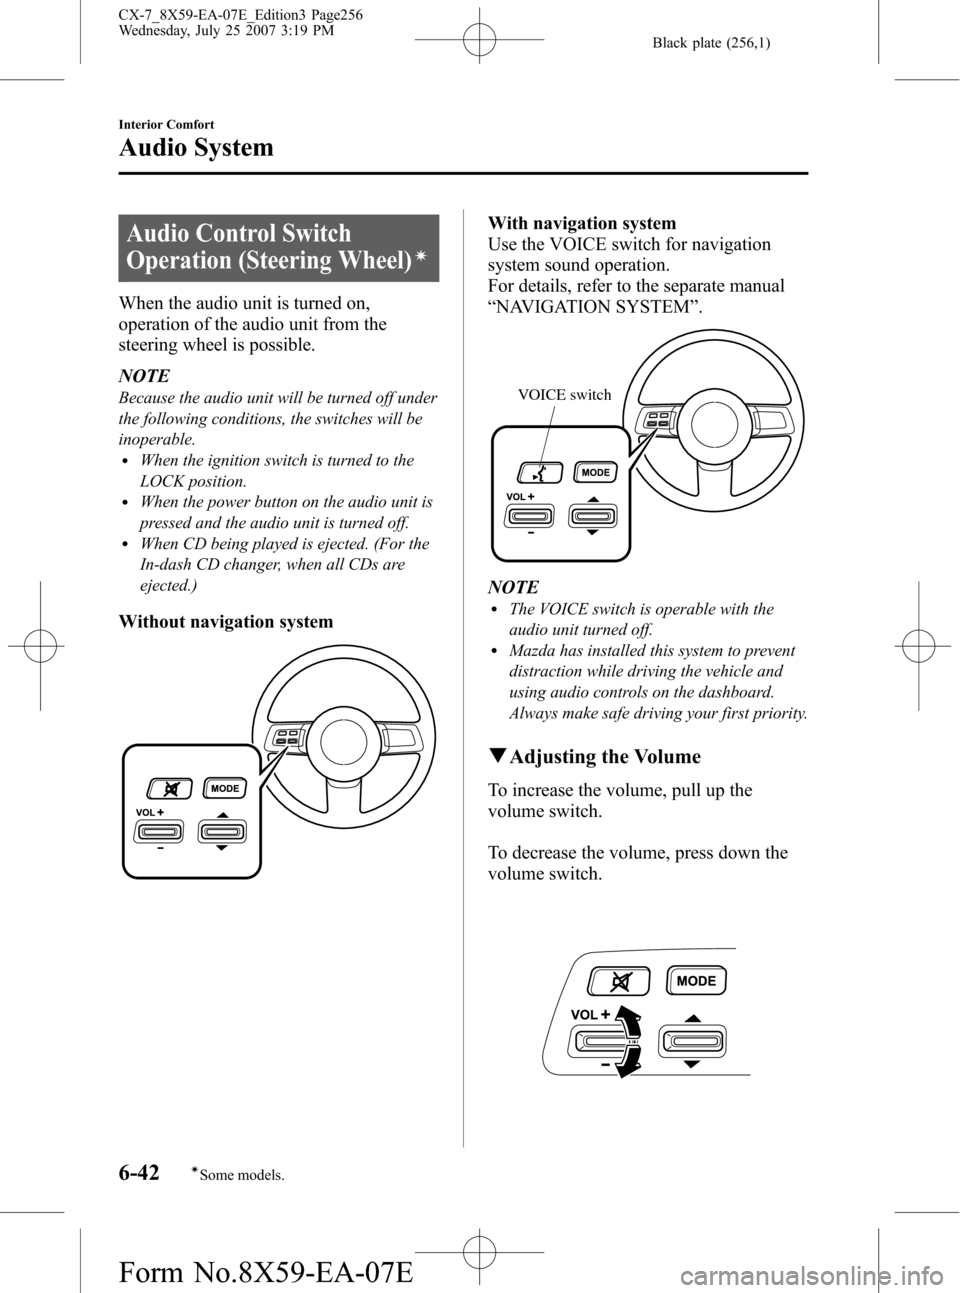 MAZDA MODEL CX-7 2008  Owners Manual (in English) Black plate (256,1)
Audio Control Switch
Operation (Steering Wheel)
í
When the audio unit is turned on,
operation of the audio unit from the
steering wheel is possible.
NOTE
Because the audio unit wi